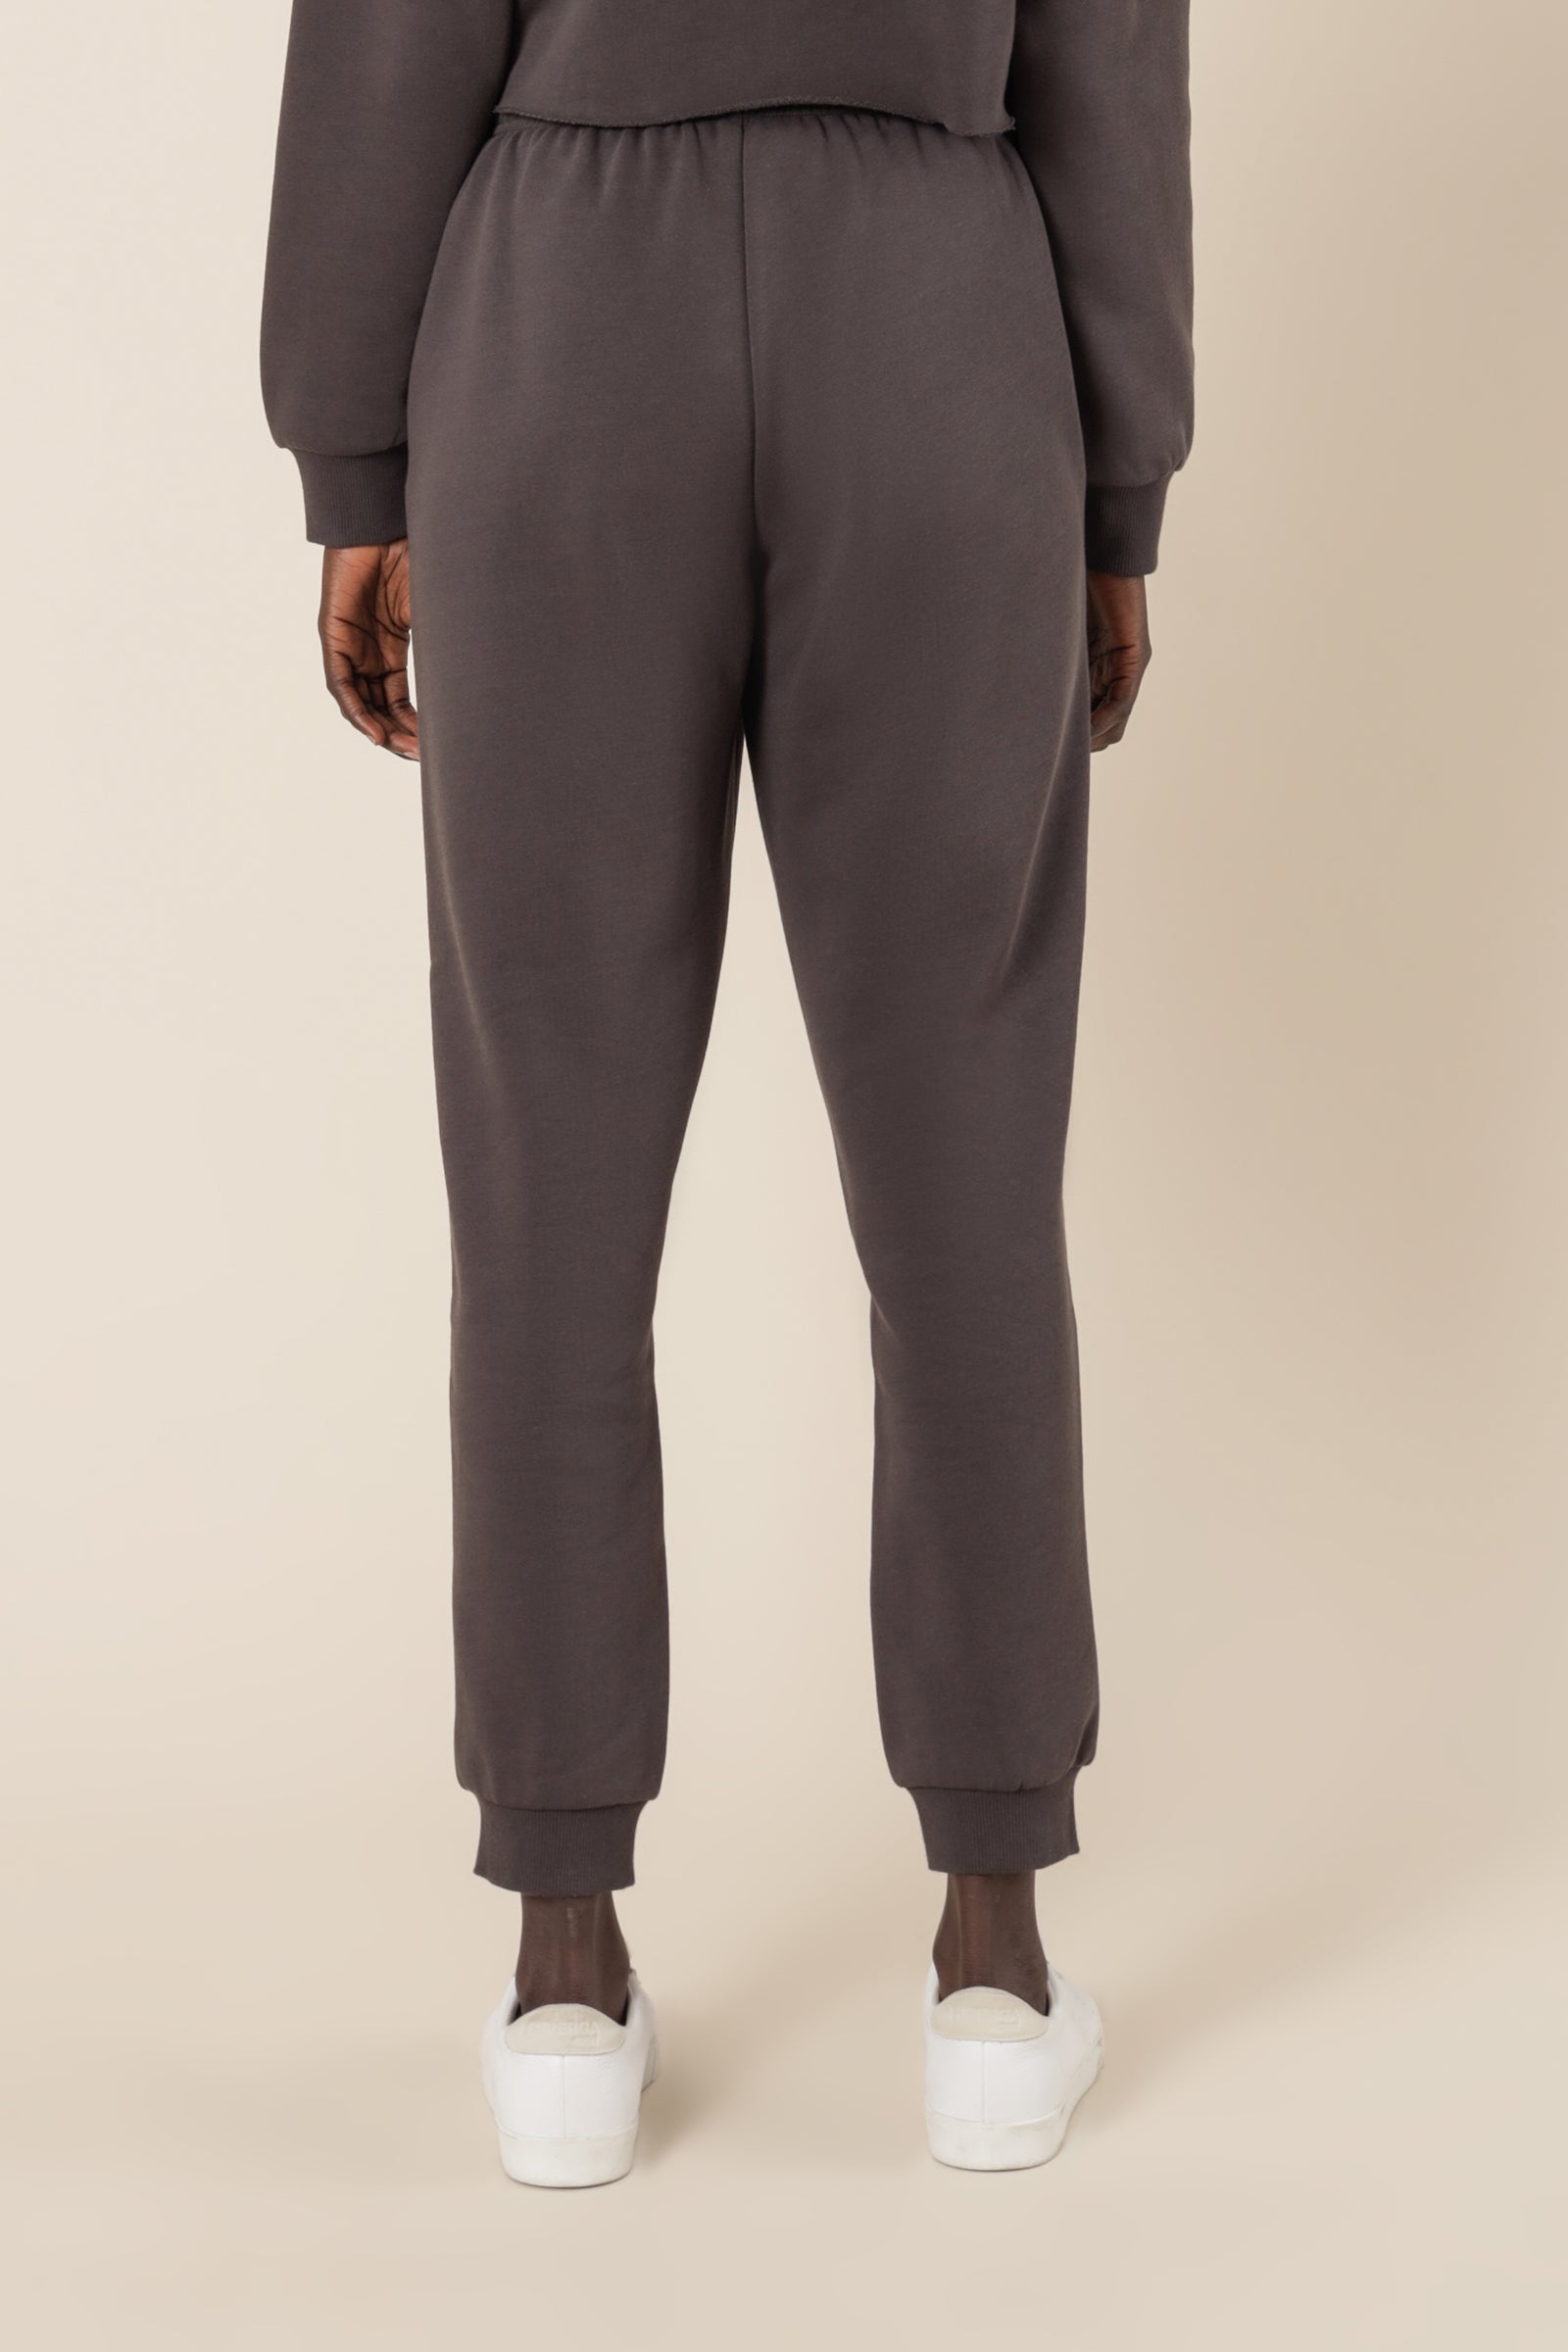 Nude Lucy Carter Classic Trackpant Coal Pants 